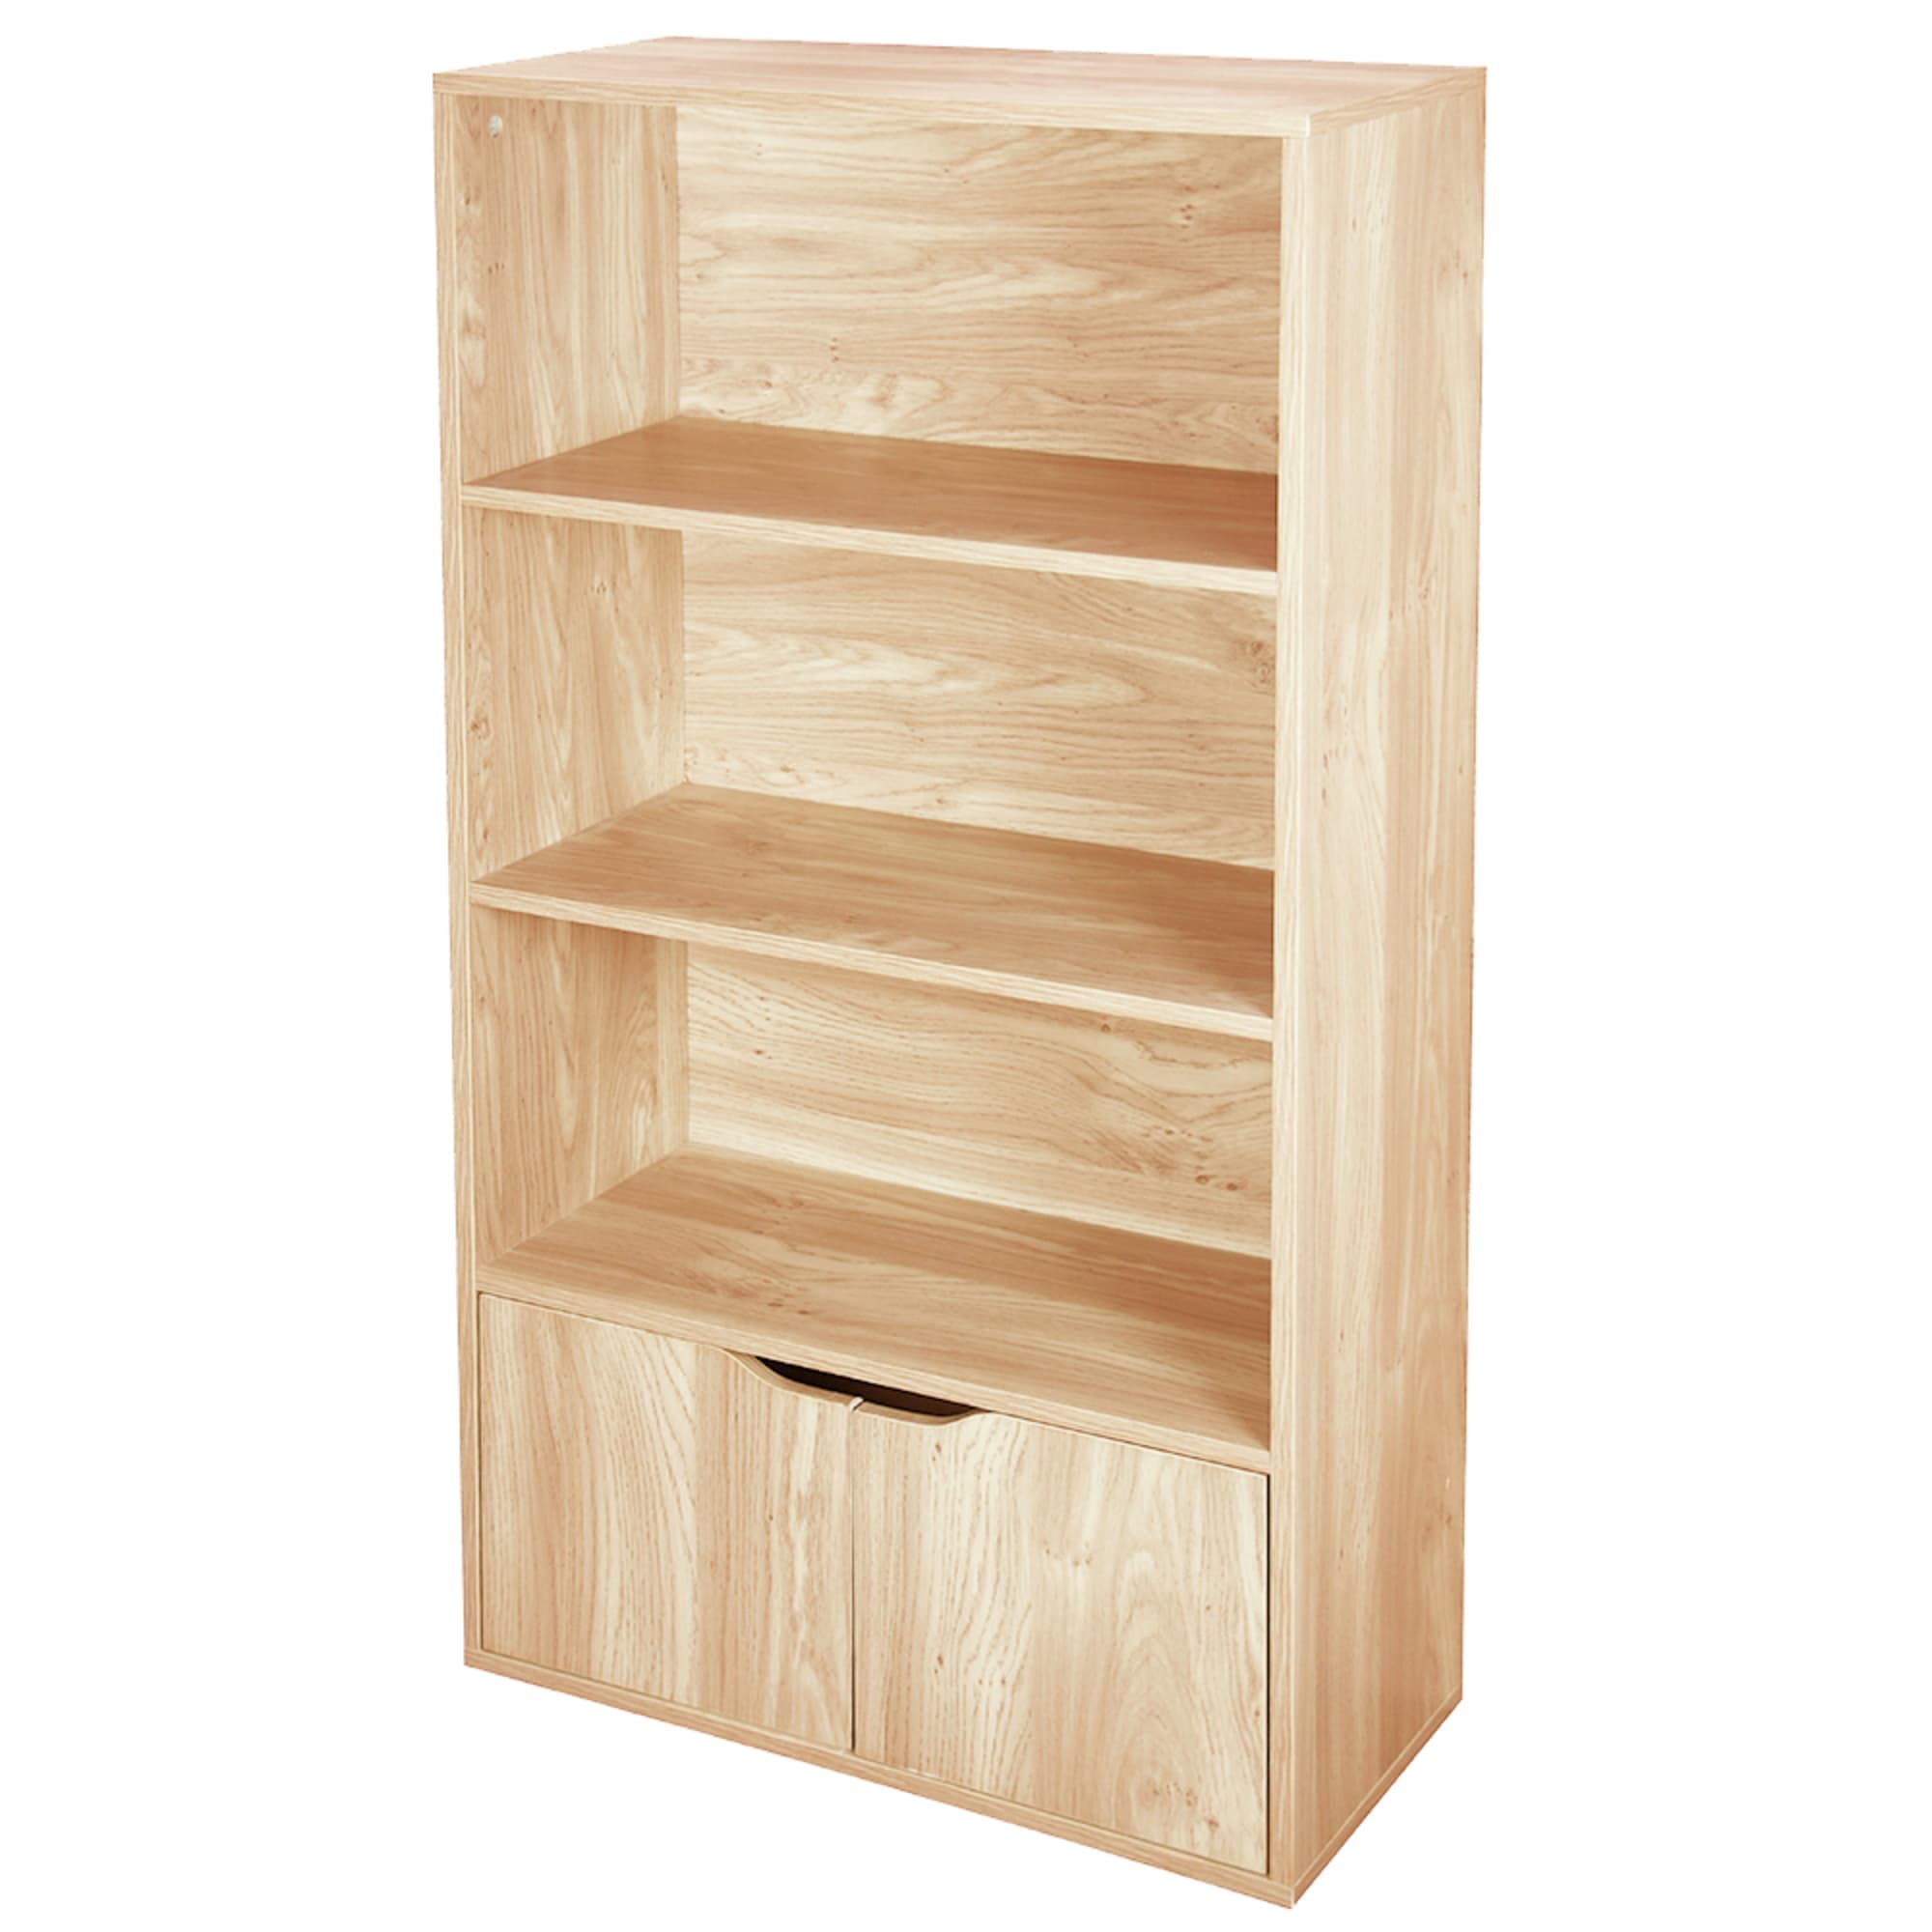 Home Basics 3 Tier Wood Bookcase with Doors, Natural $50.00 EACH, CASE PACK OF 1